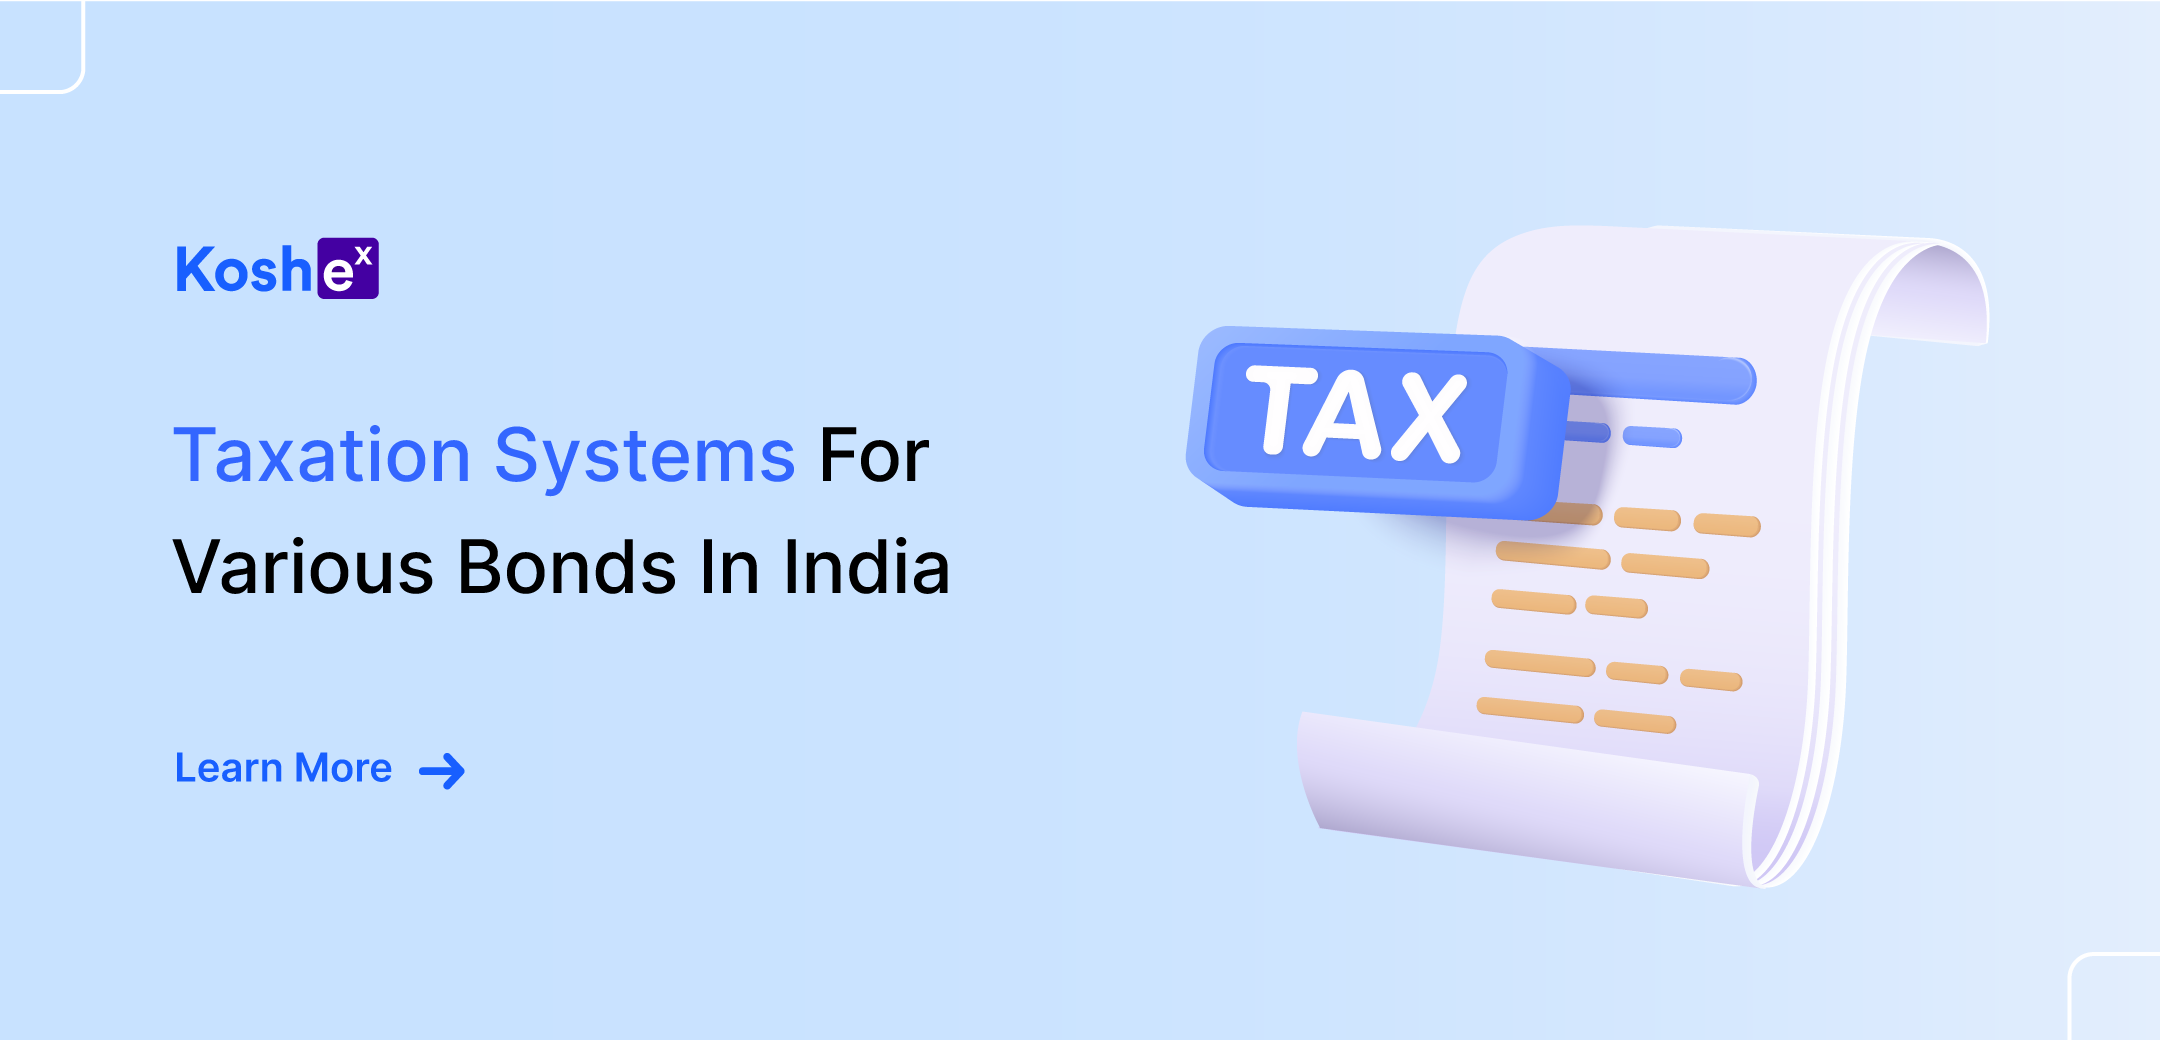 Taxation Of Bond Investments:Taxation Systems For Various Bonds In India